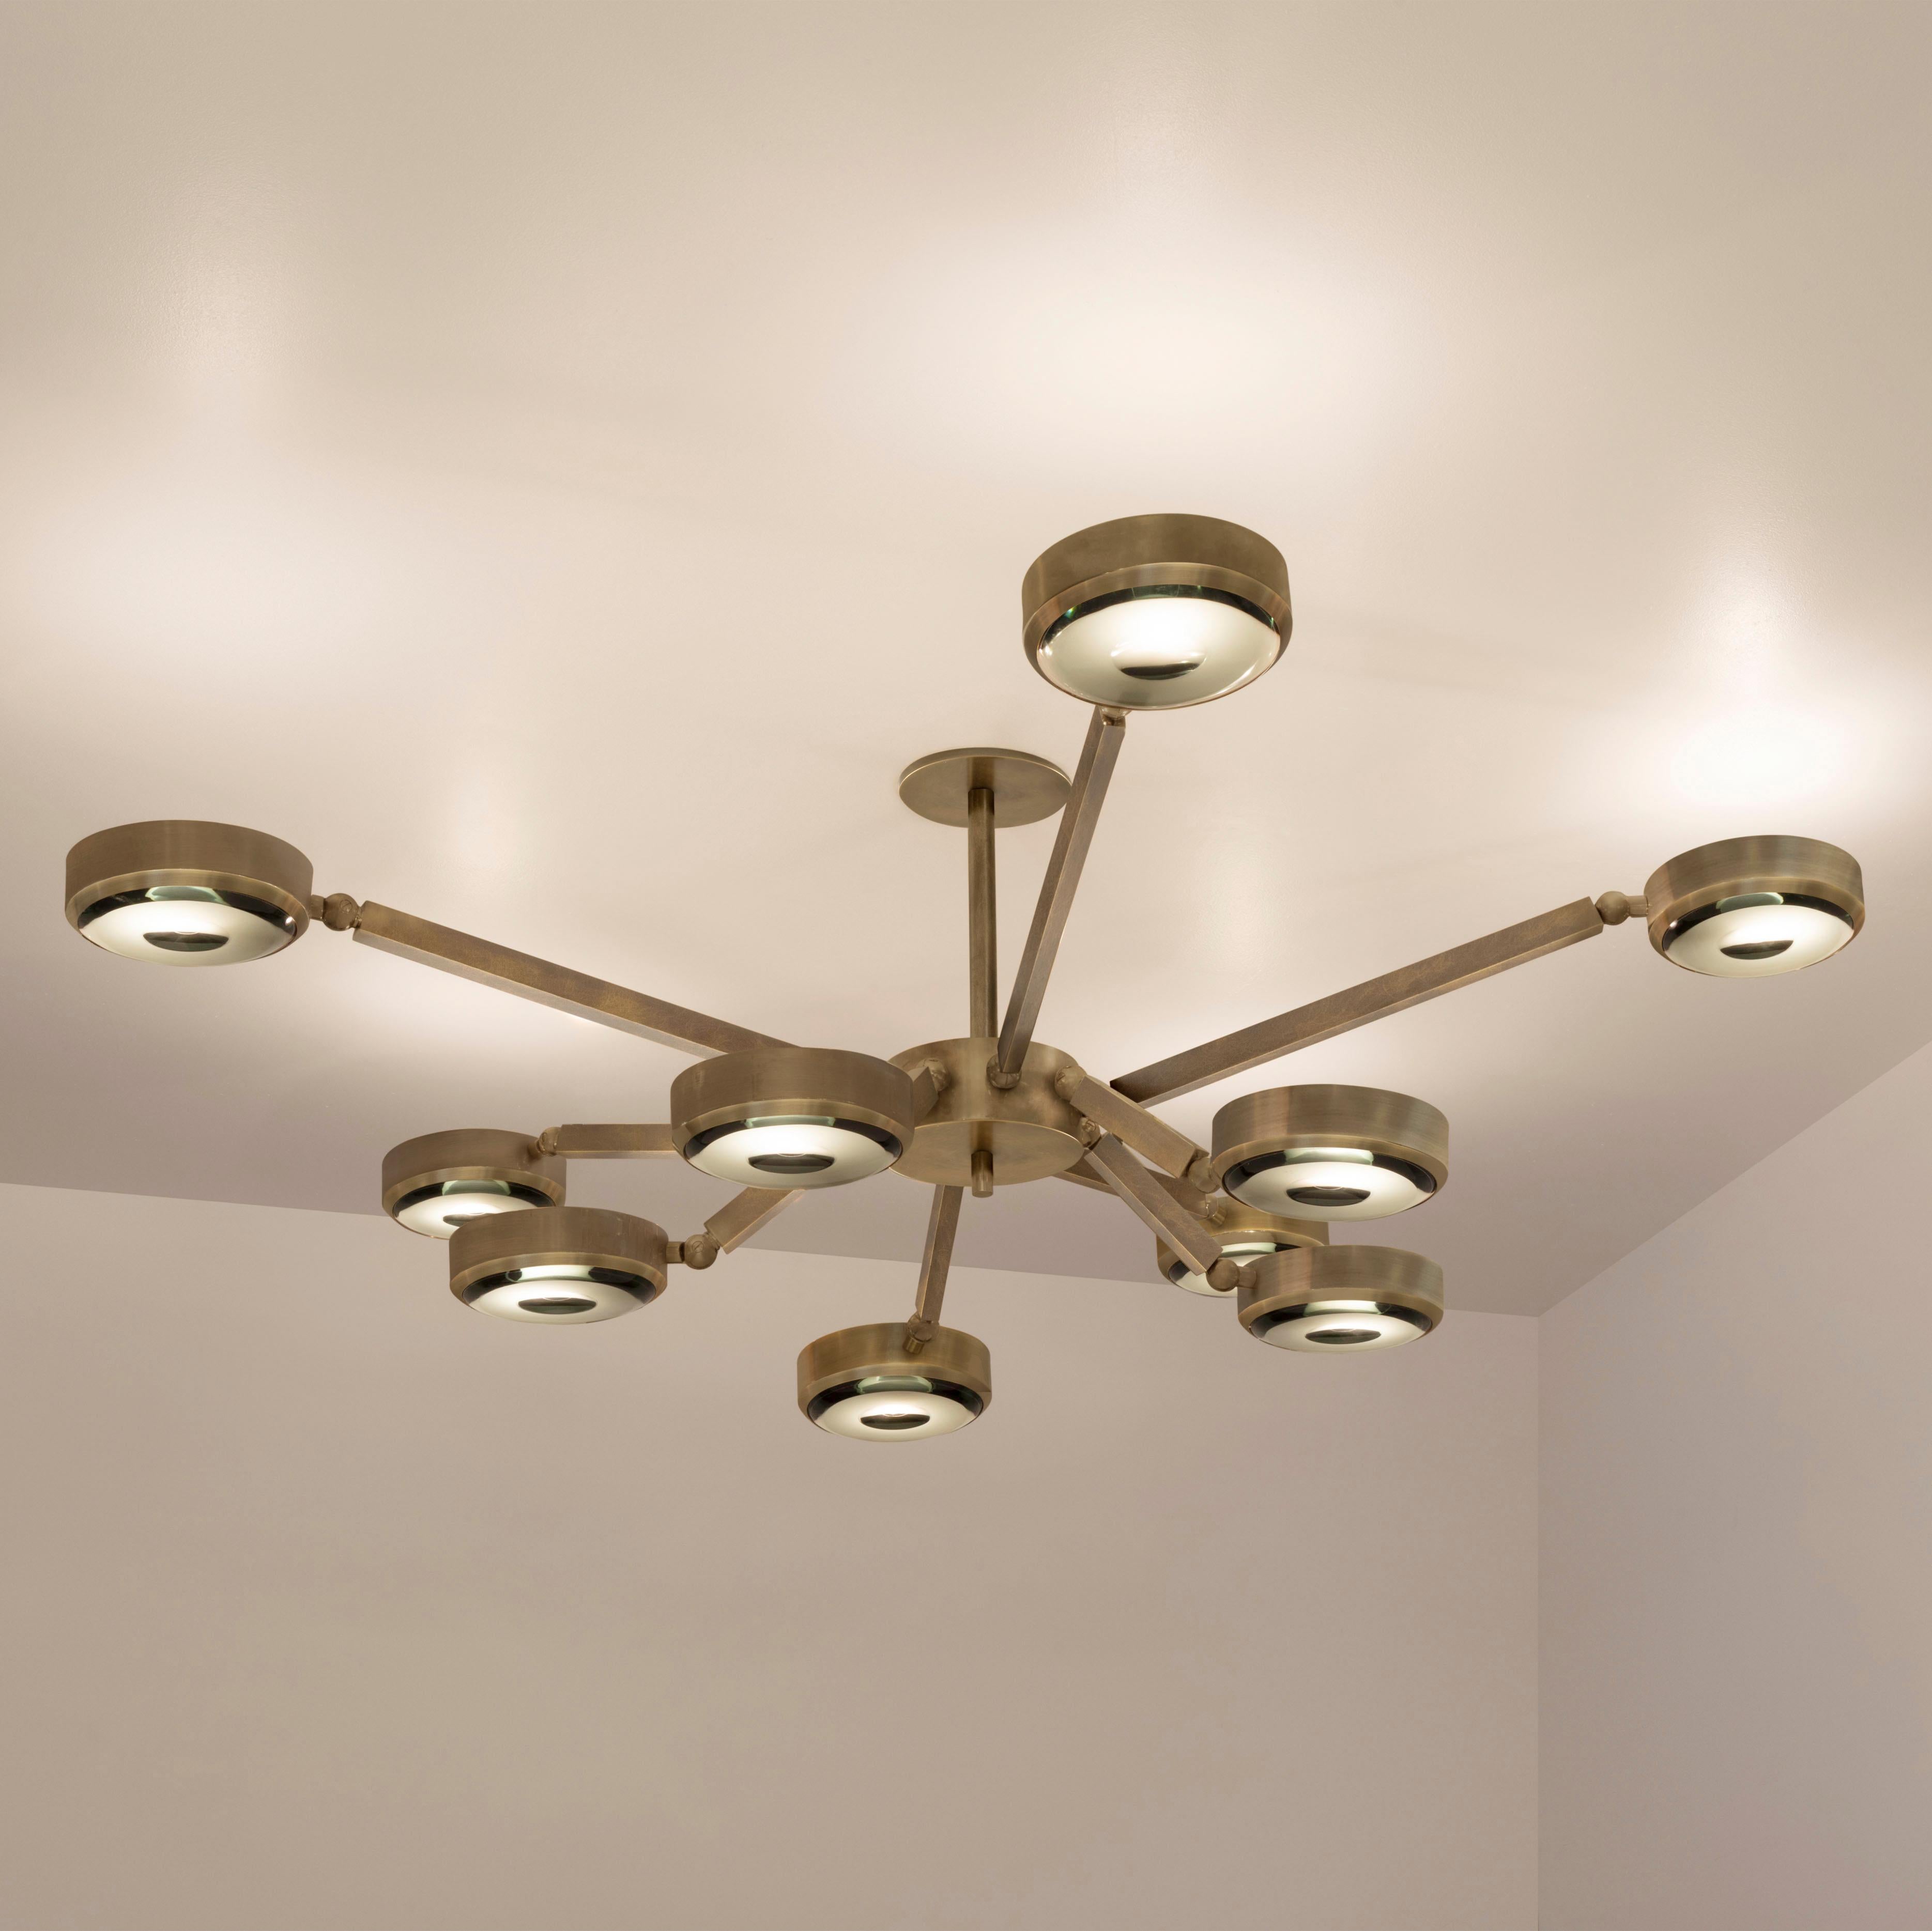 The Oculus ceiling light features an innovative articulating design that allows the ten arms to have a wide range of motion for endless configurations. The brass constructed frame can be flush mounted or installed on a stem and is fitted with our